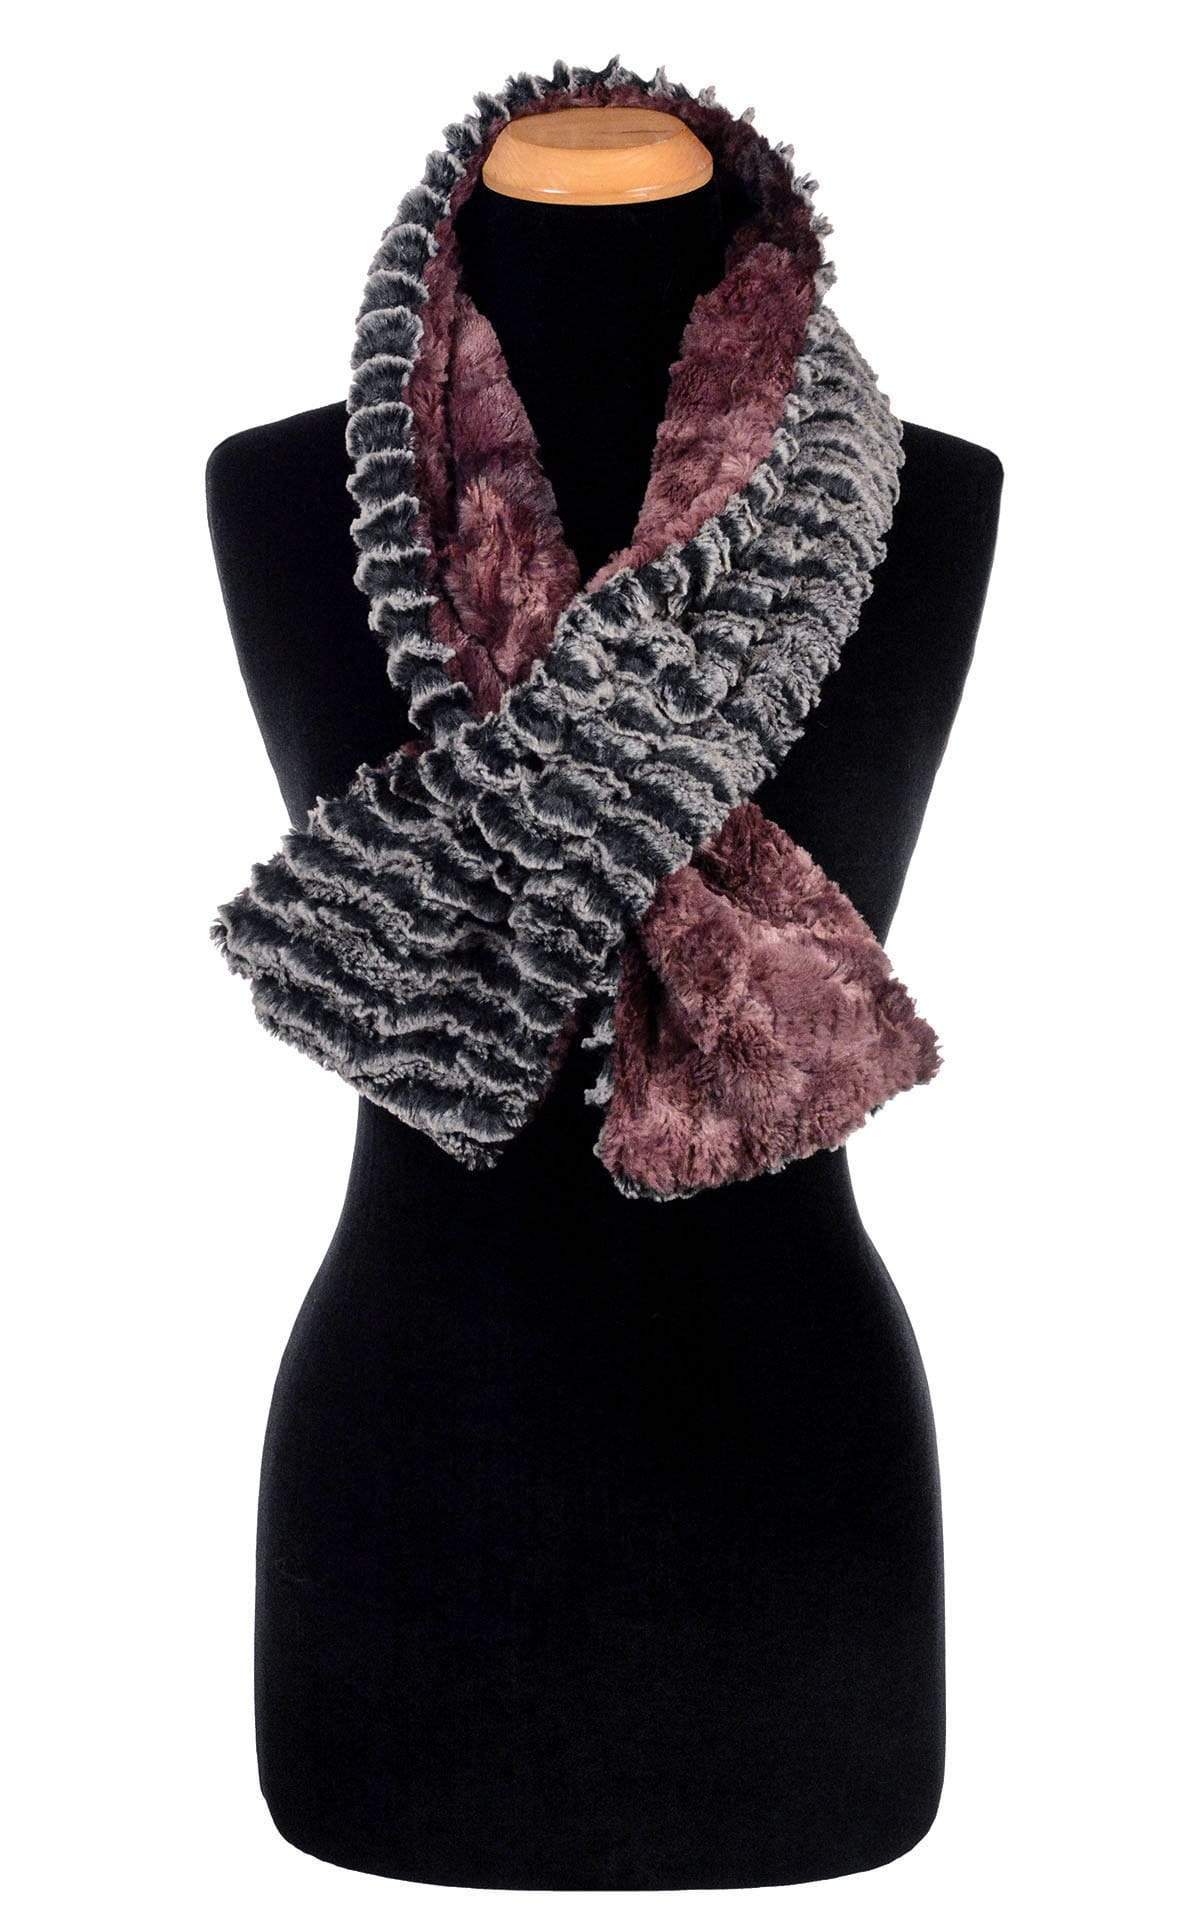  Product shot of Women’s reversible Long Pull Through Scarf | Deseret Sand in Charcoal gray with Highland in Thistle faux fur, Mauve tie-dye and grey | Handmade in Seattle WA | Pandemonium Millinery